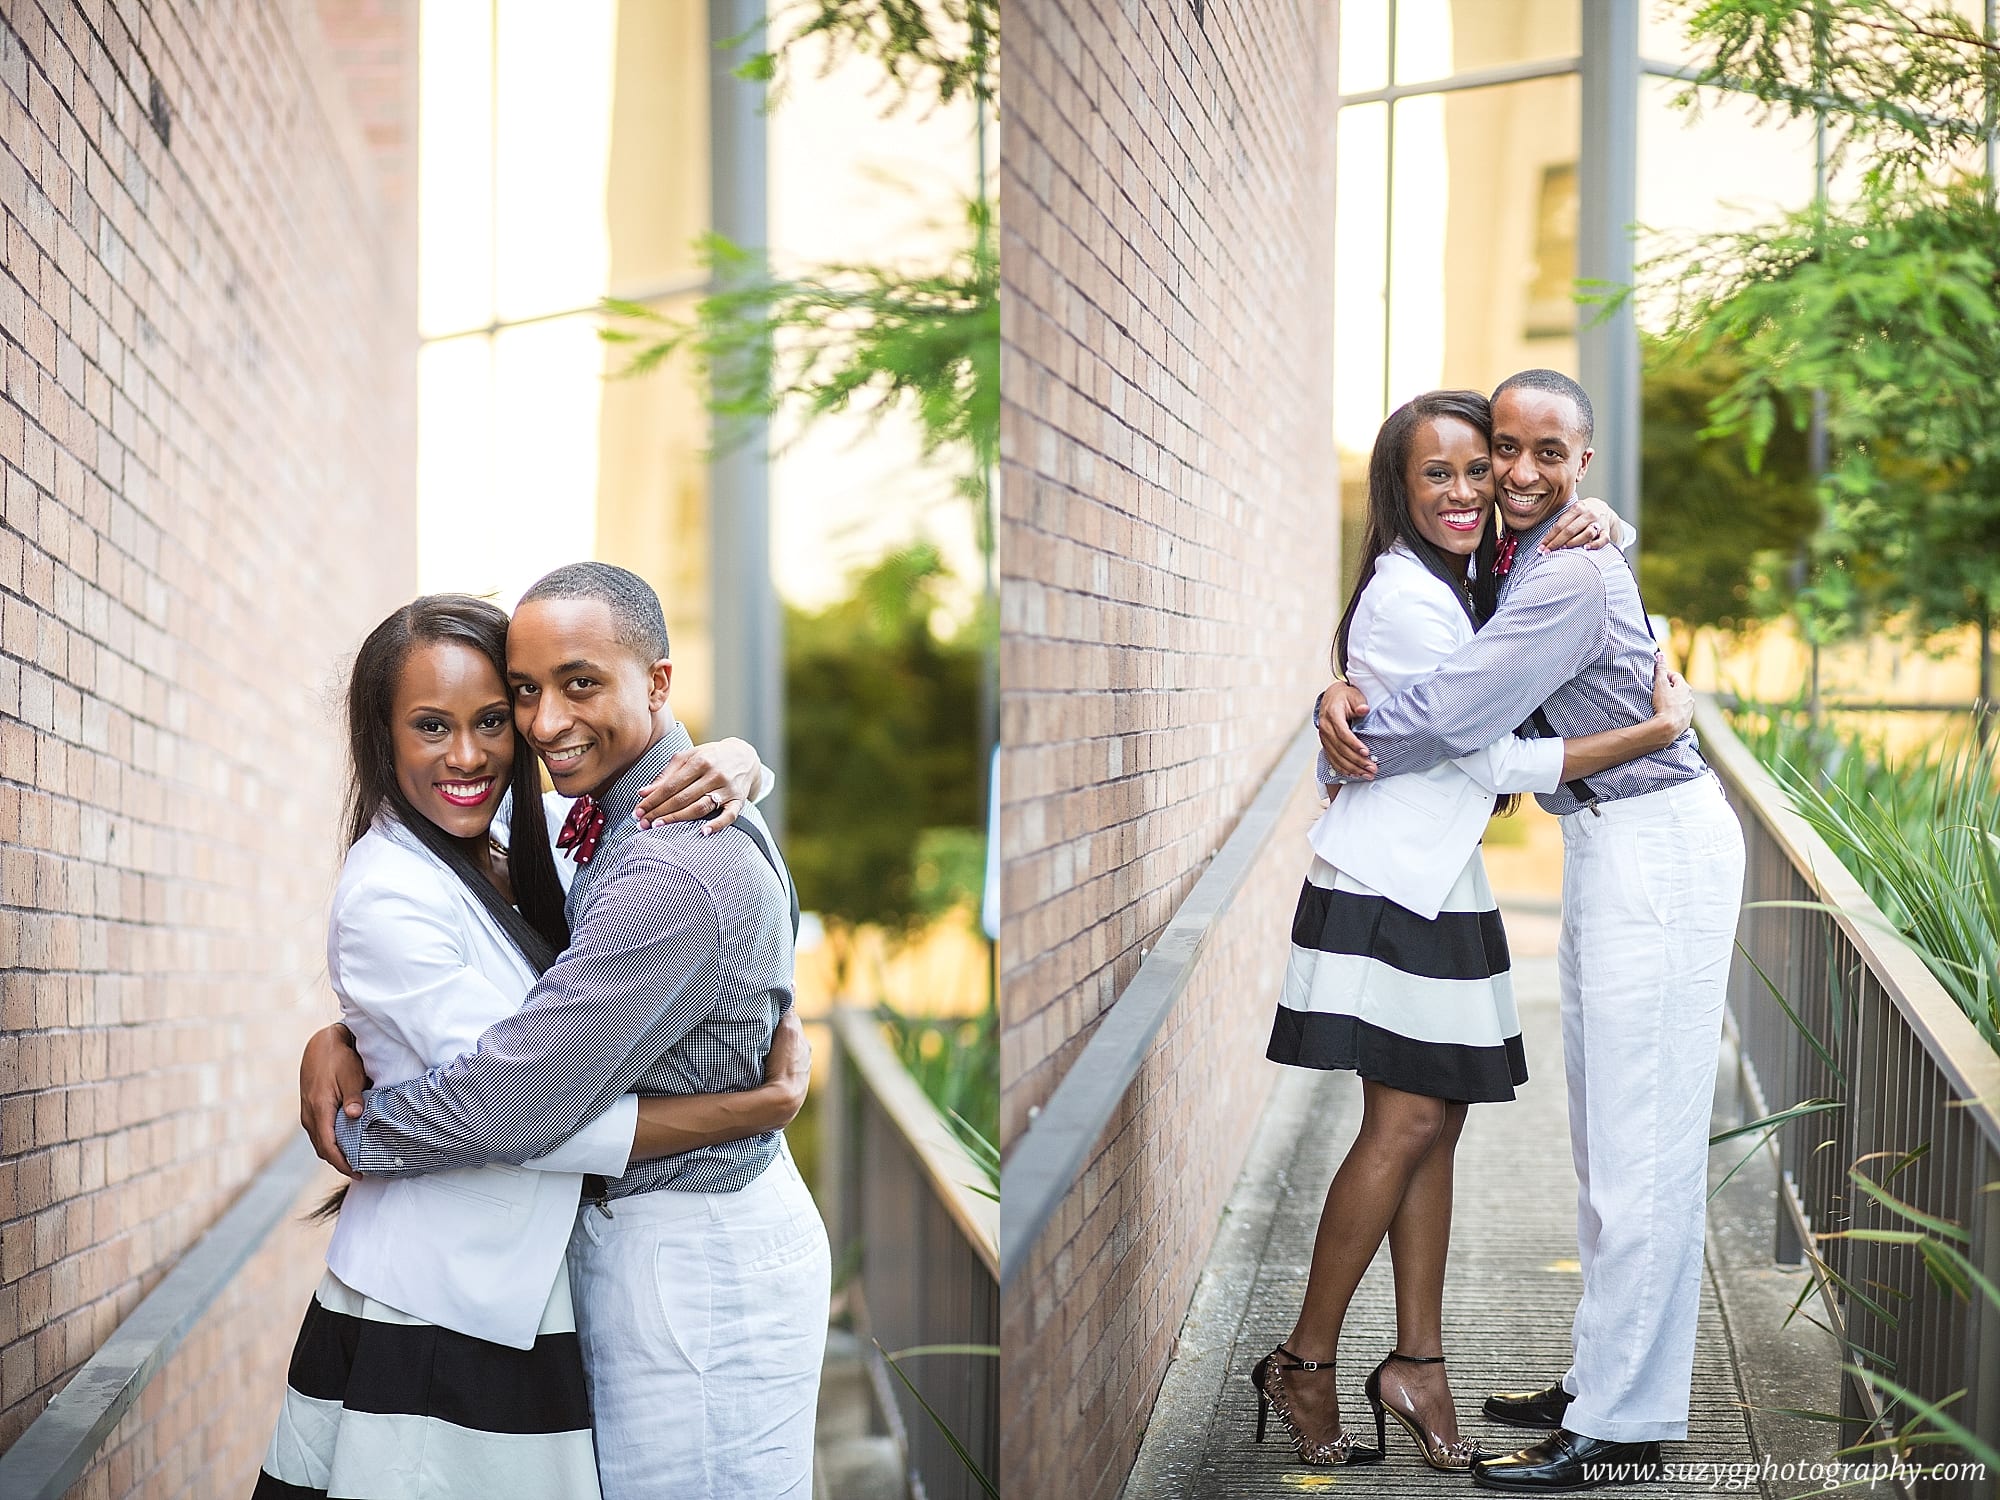 engagements-new orleans-texas-baton rouge-lake charles-suzy g-photography-suzygphotography_0044